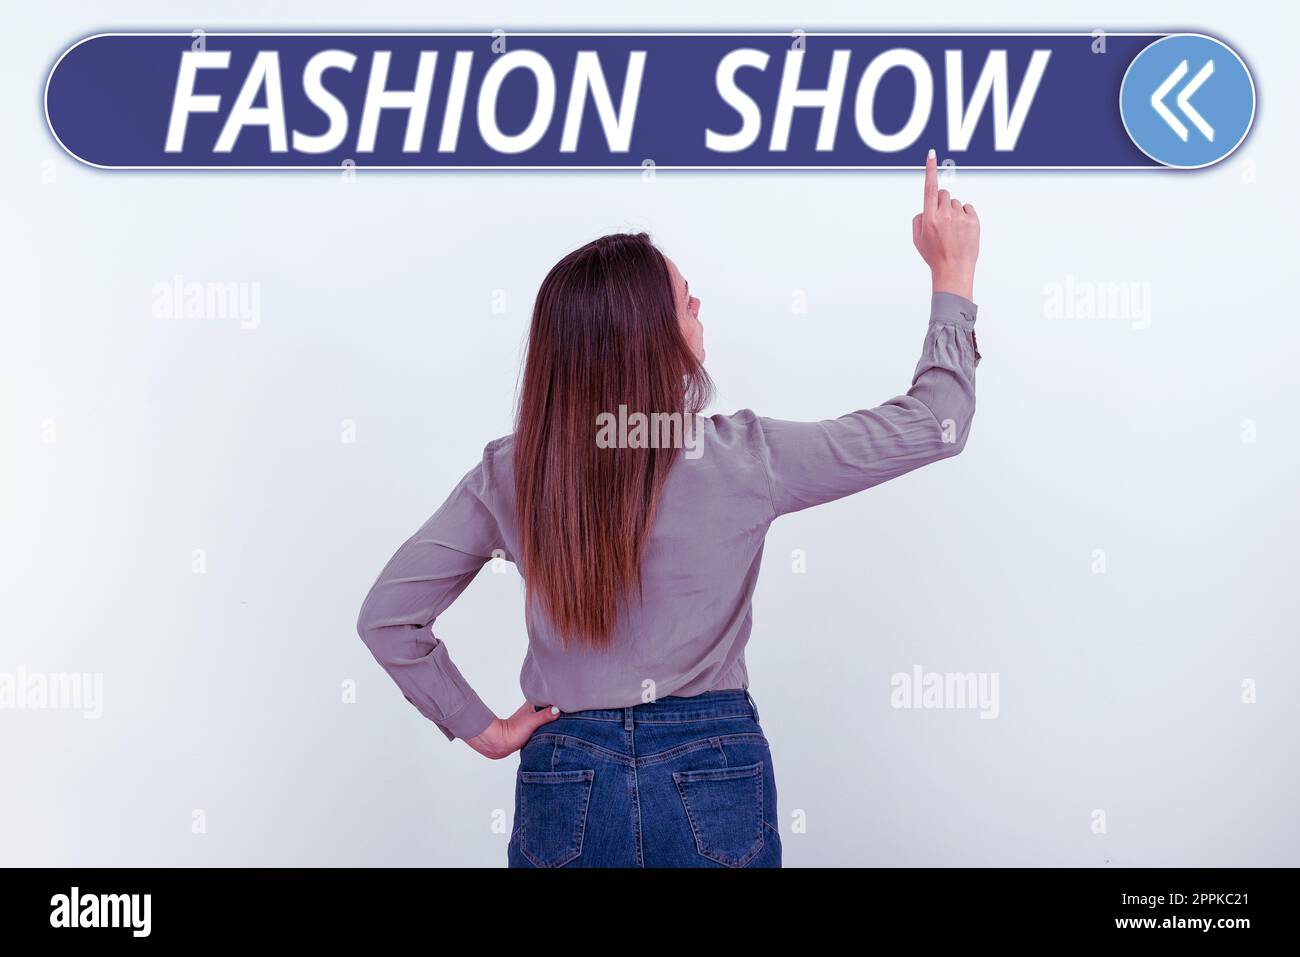 Inspiration showing sign Fashion Show. Internet Concept exibition that involves styles of clothing and appearance Stock Photo